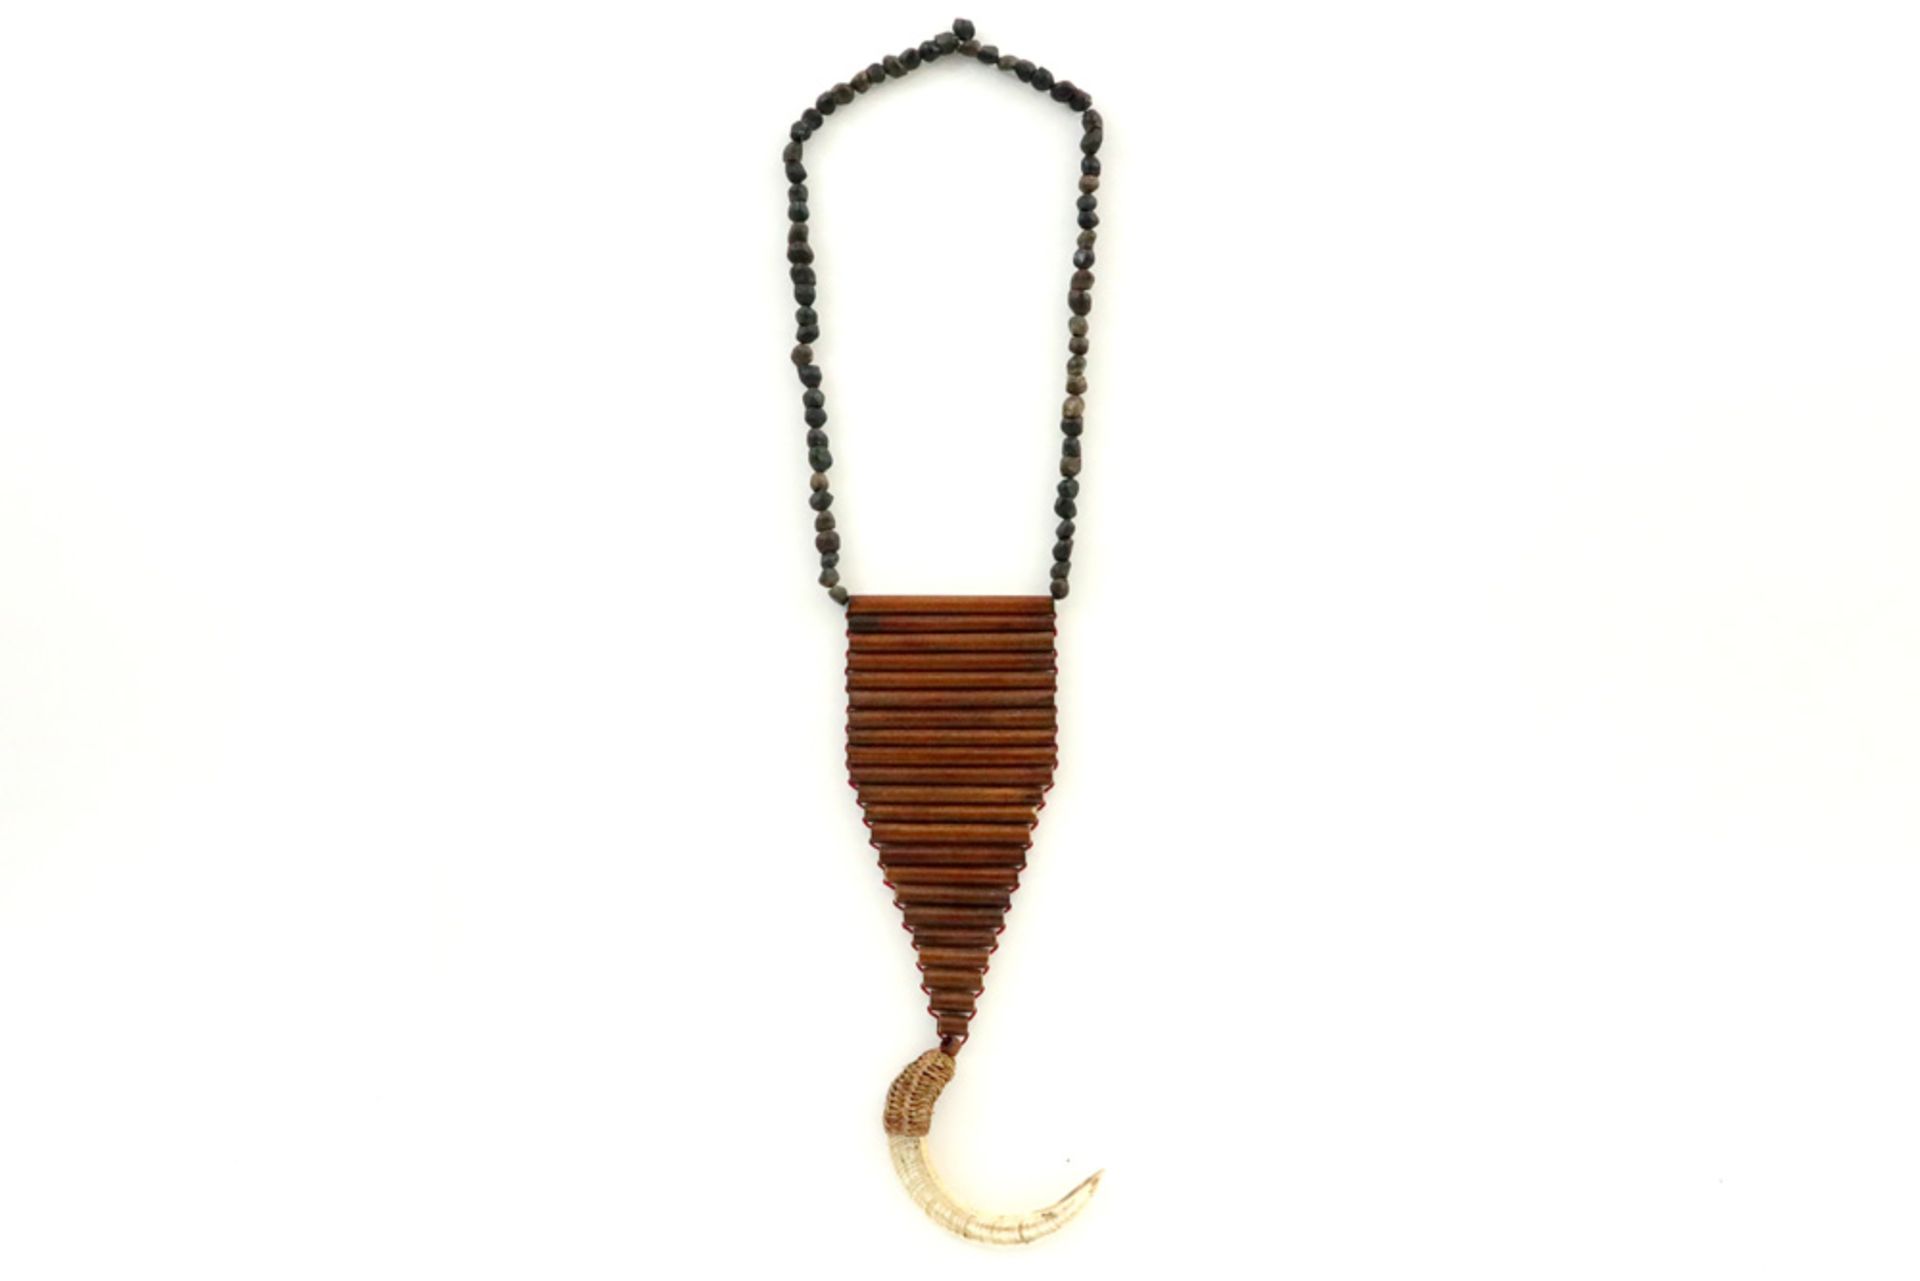 Papua New Guinean Western "Enga" Highlands "Kina" breastpiece of necklace with a shell on a fiber